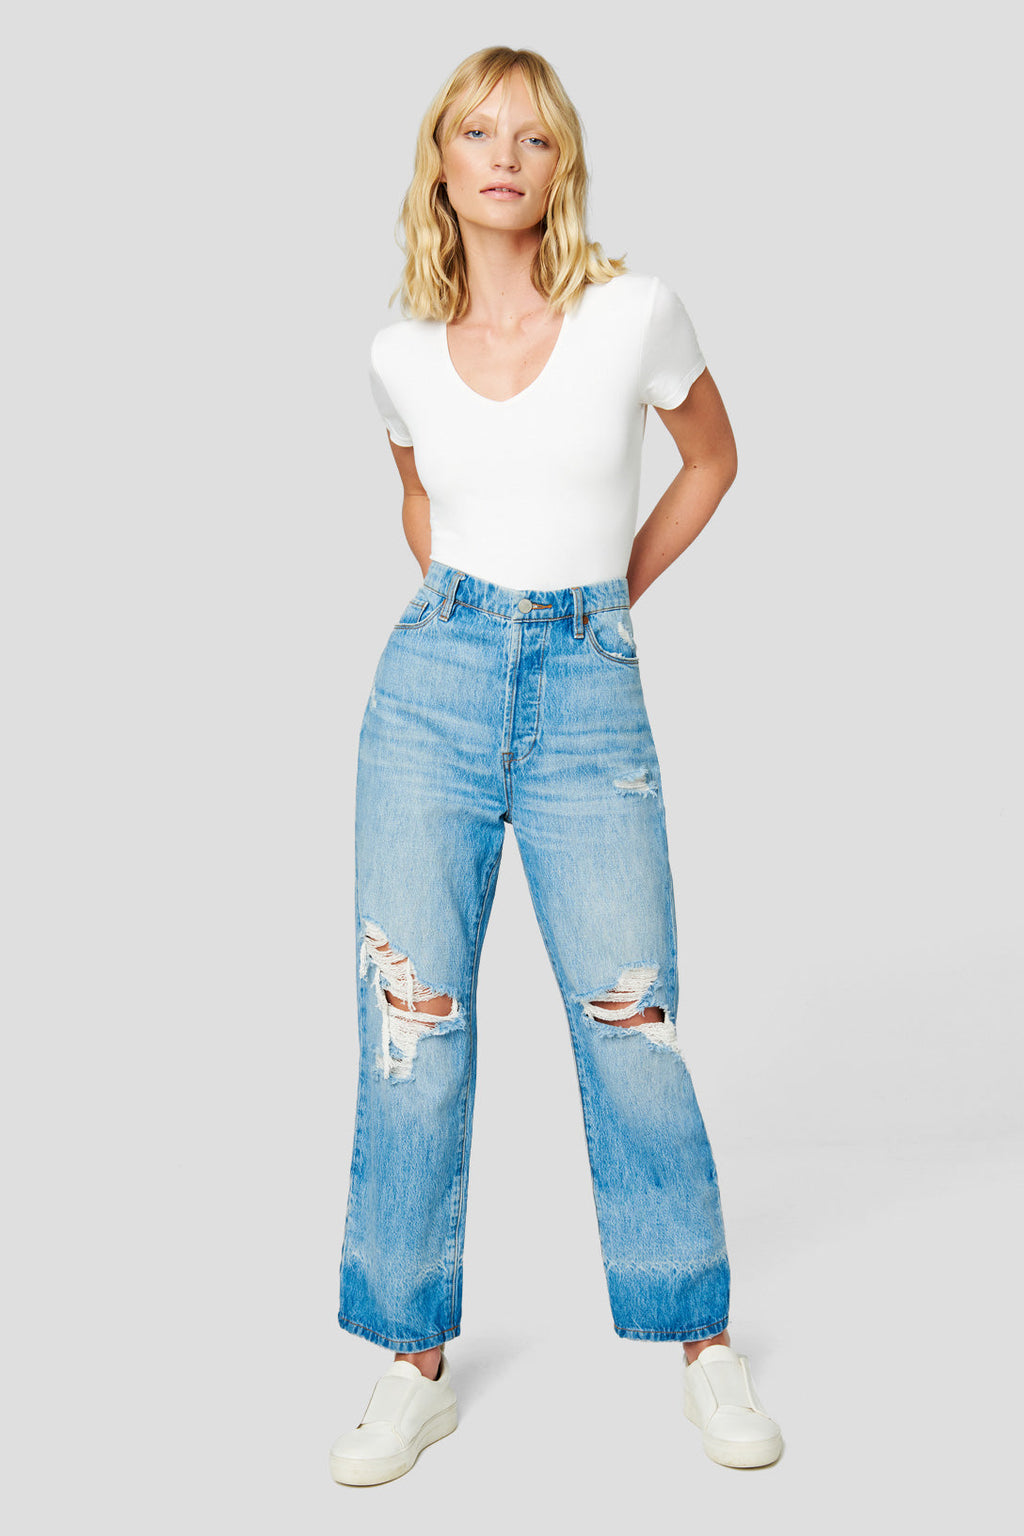 Blank NYC The Baxter - Pink Denim Jeans - High-Rise Jeans - Lulus